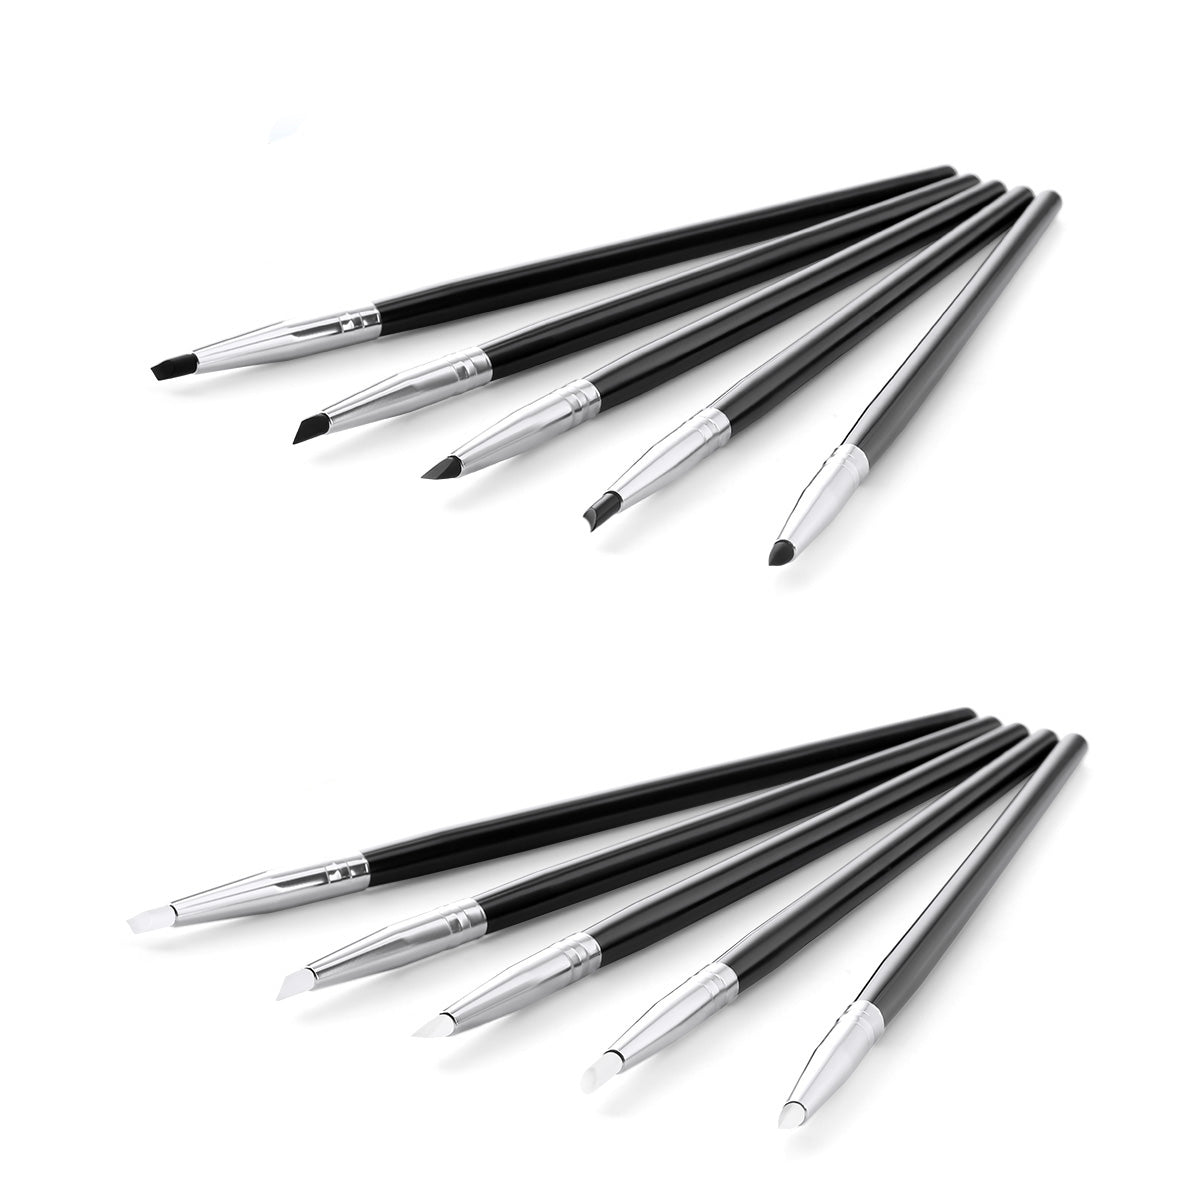 Dental Porcelain Brush Pen Composite Cement Porcelain Silicone Shaping Smoothing Removing 5pcs/Bag - pairaydental.com